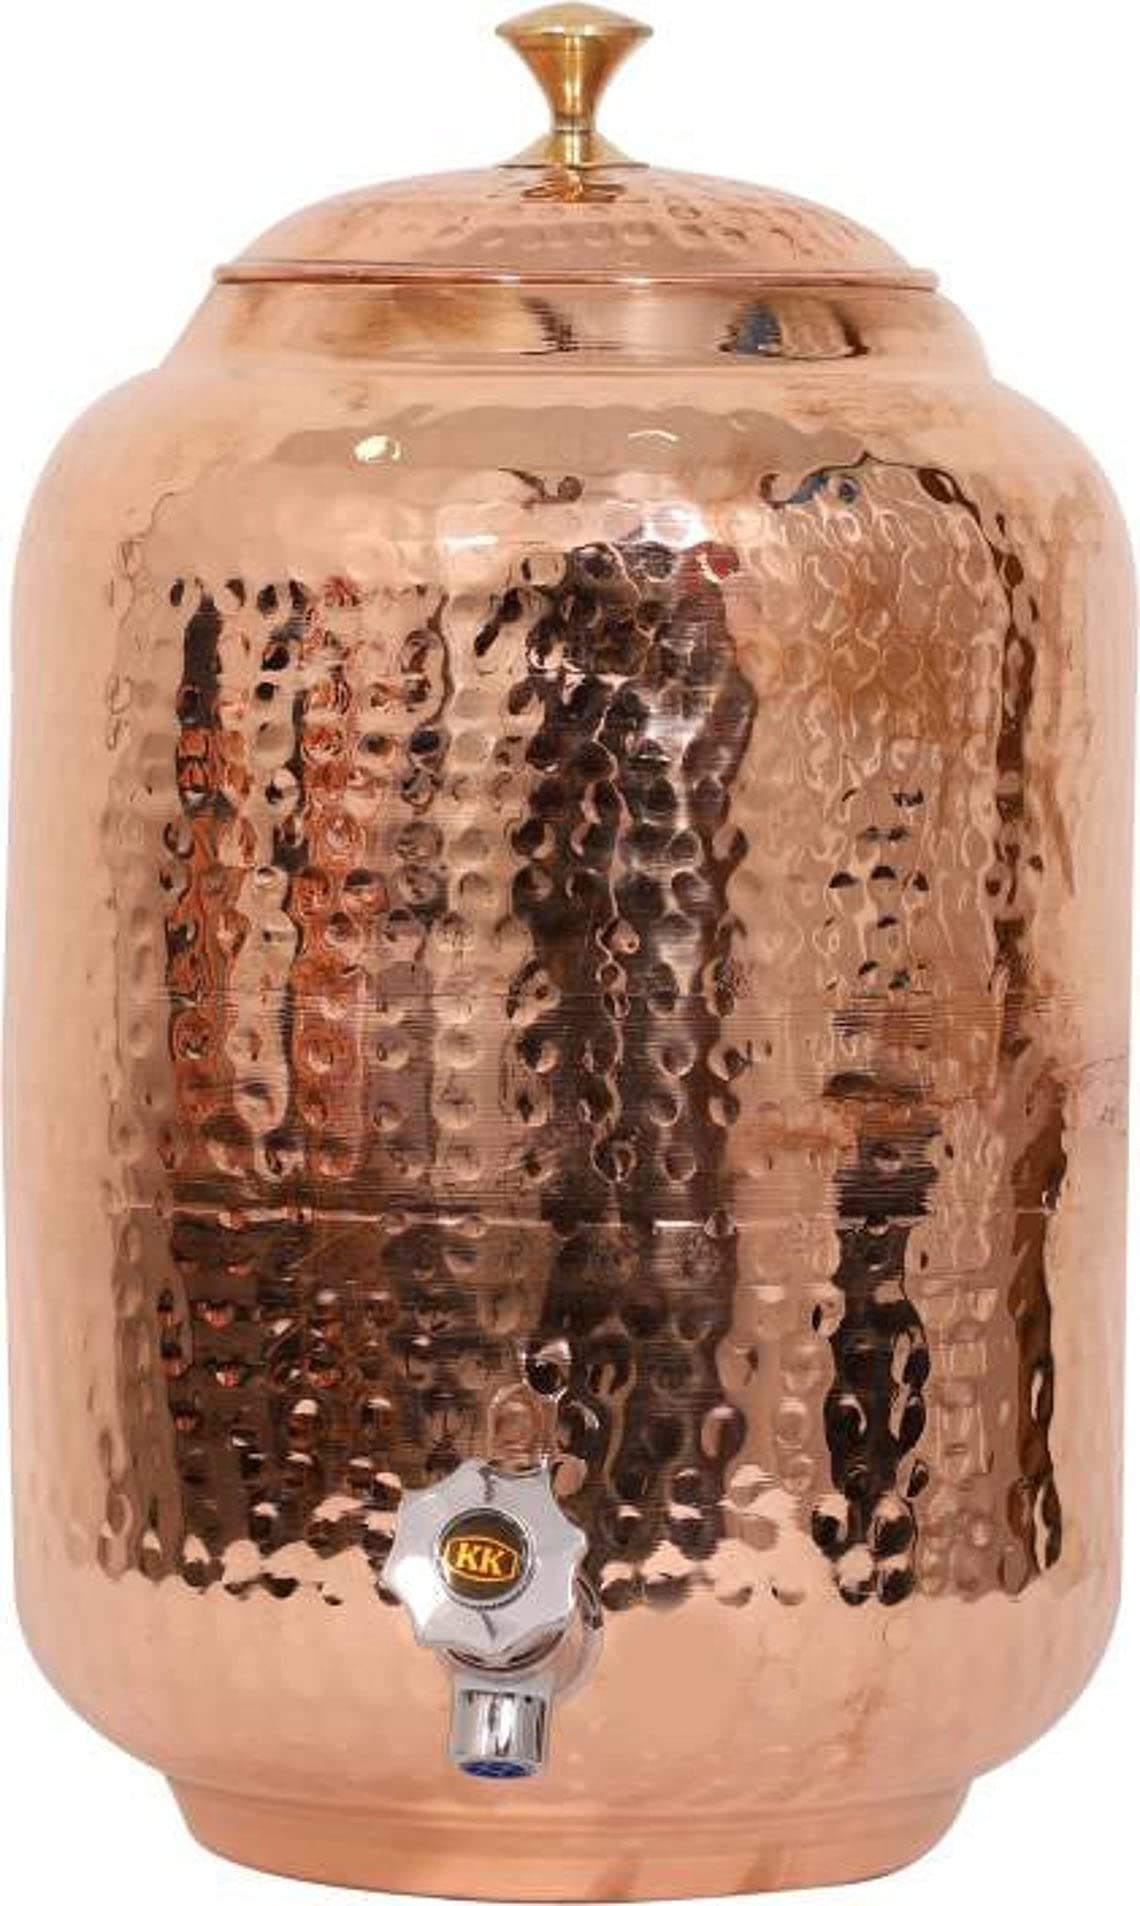 Hand Crunch Pure copper drinkware water dispenser - 8L- hammered finish- Pot ayurveda health healing 8 Liter storage capacity water container tank with 2 matching tumbler glasses & 1 copper Bottle